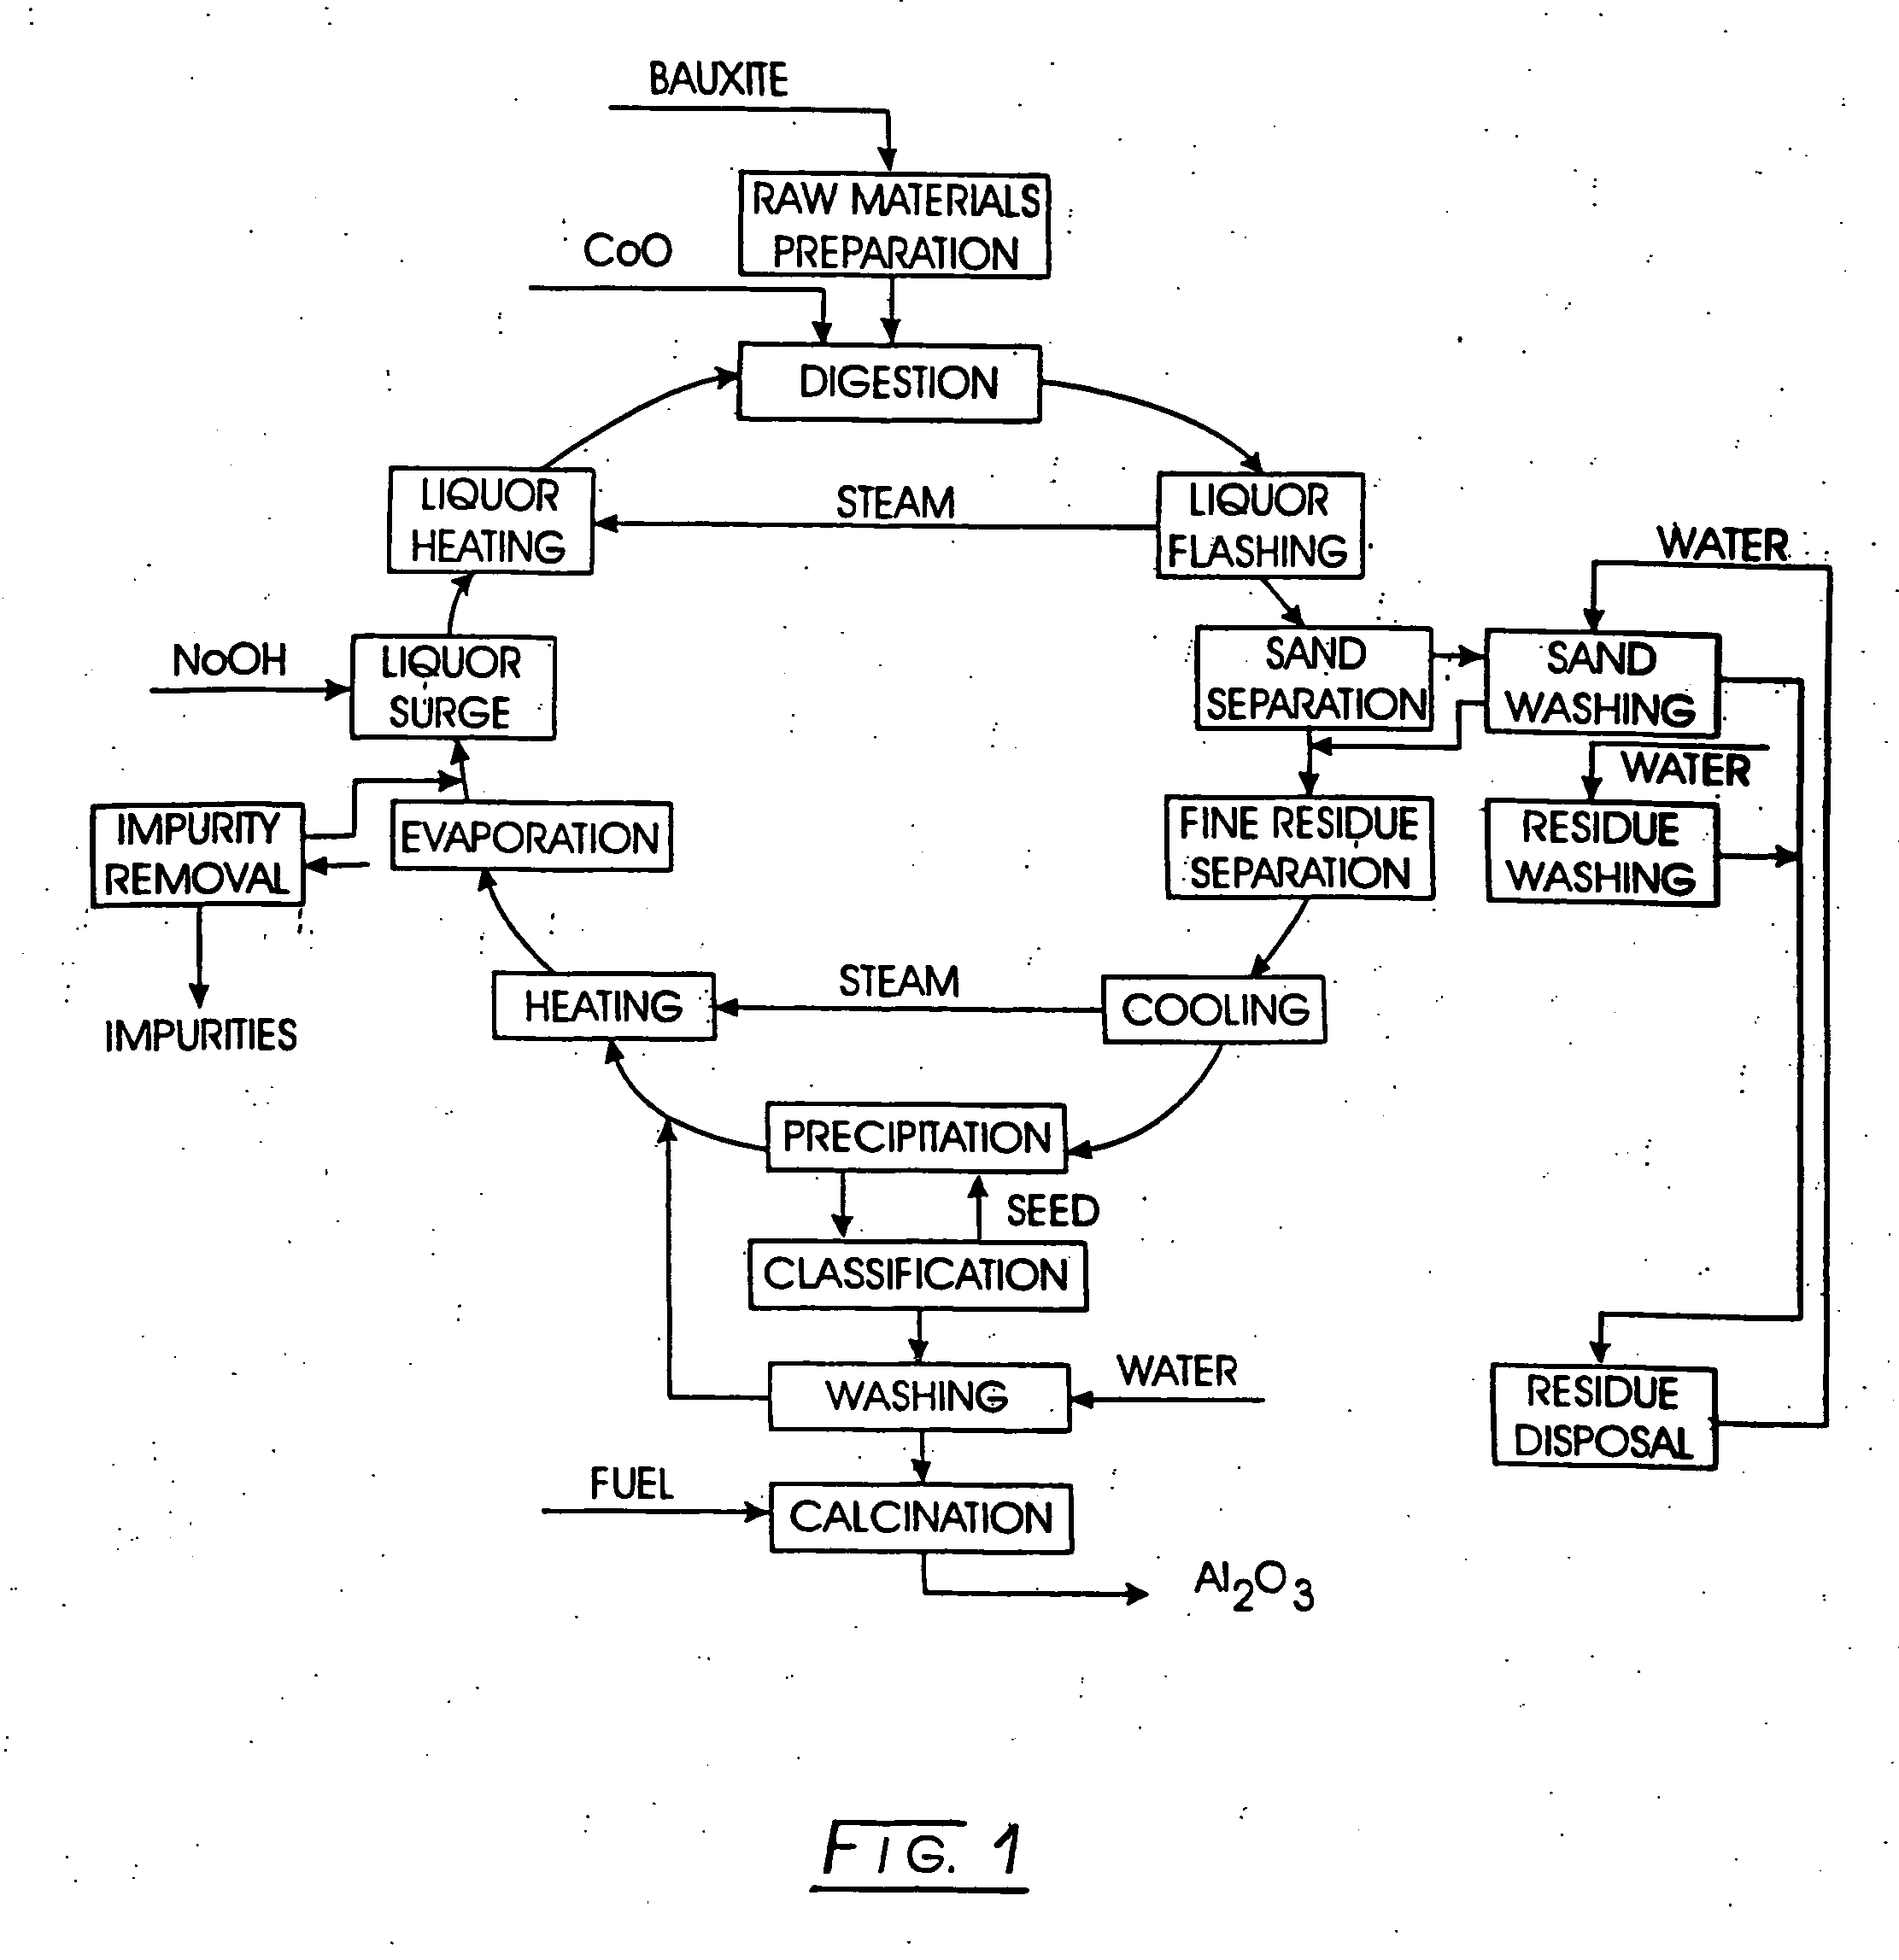 Process for reducing contaminants in condensate resulting from the conversion of bauxite to alumina